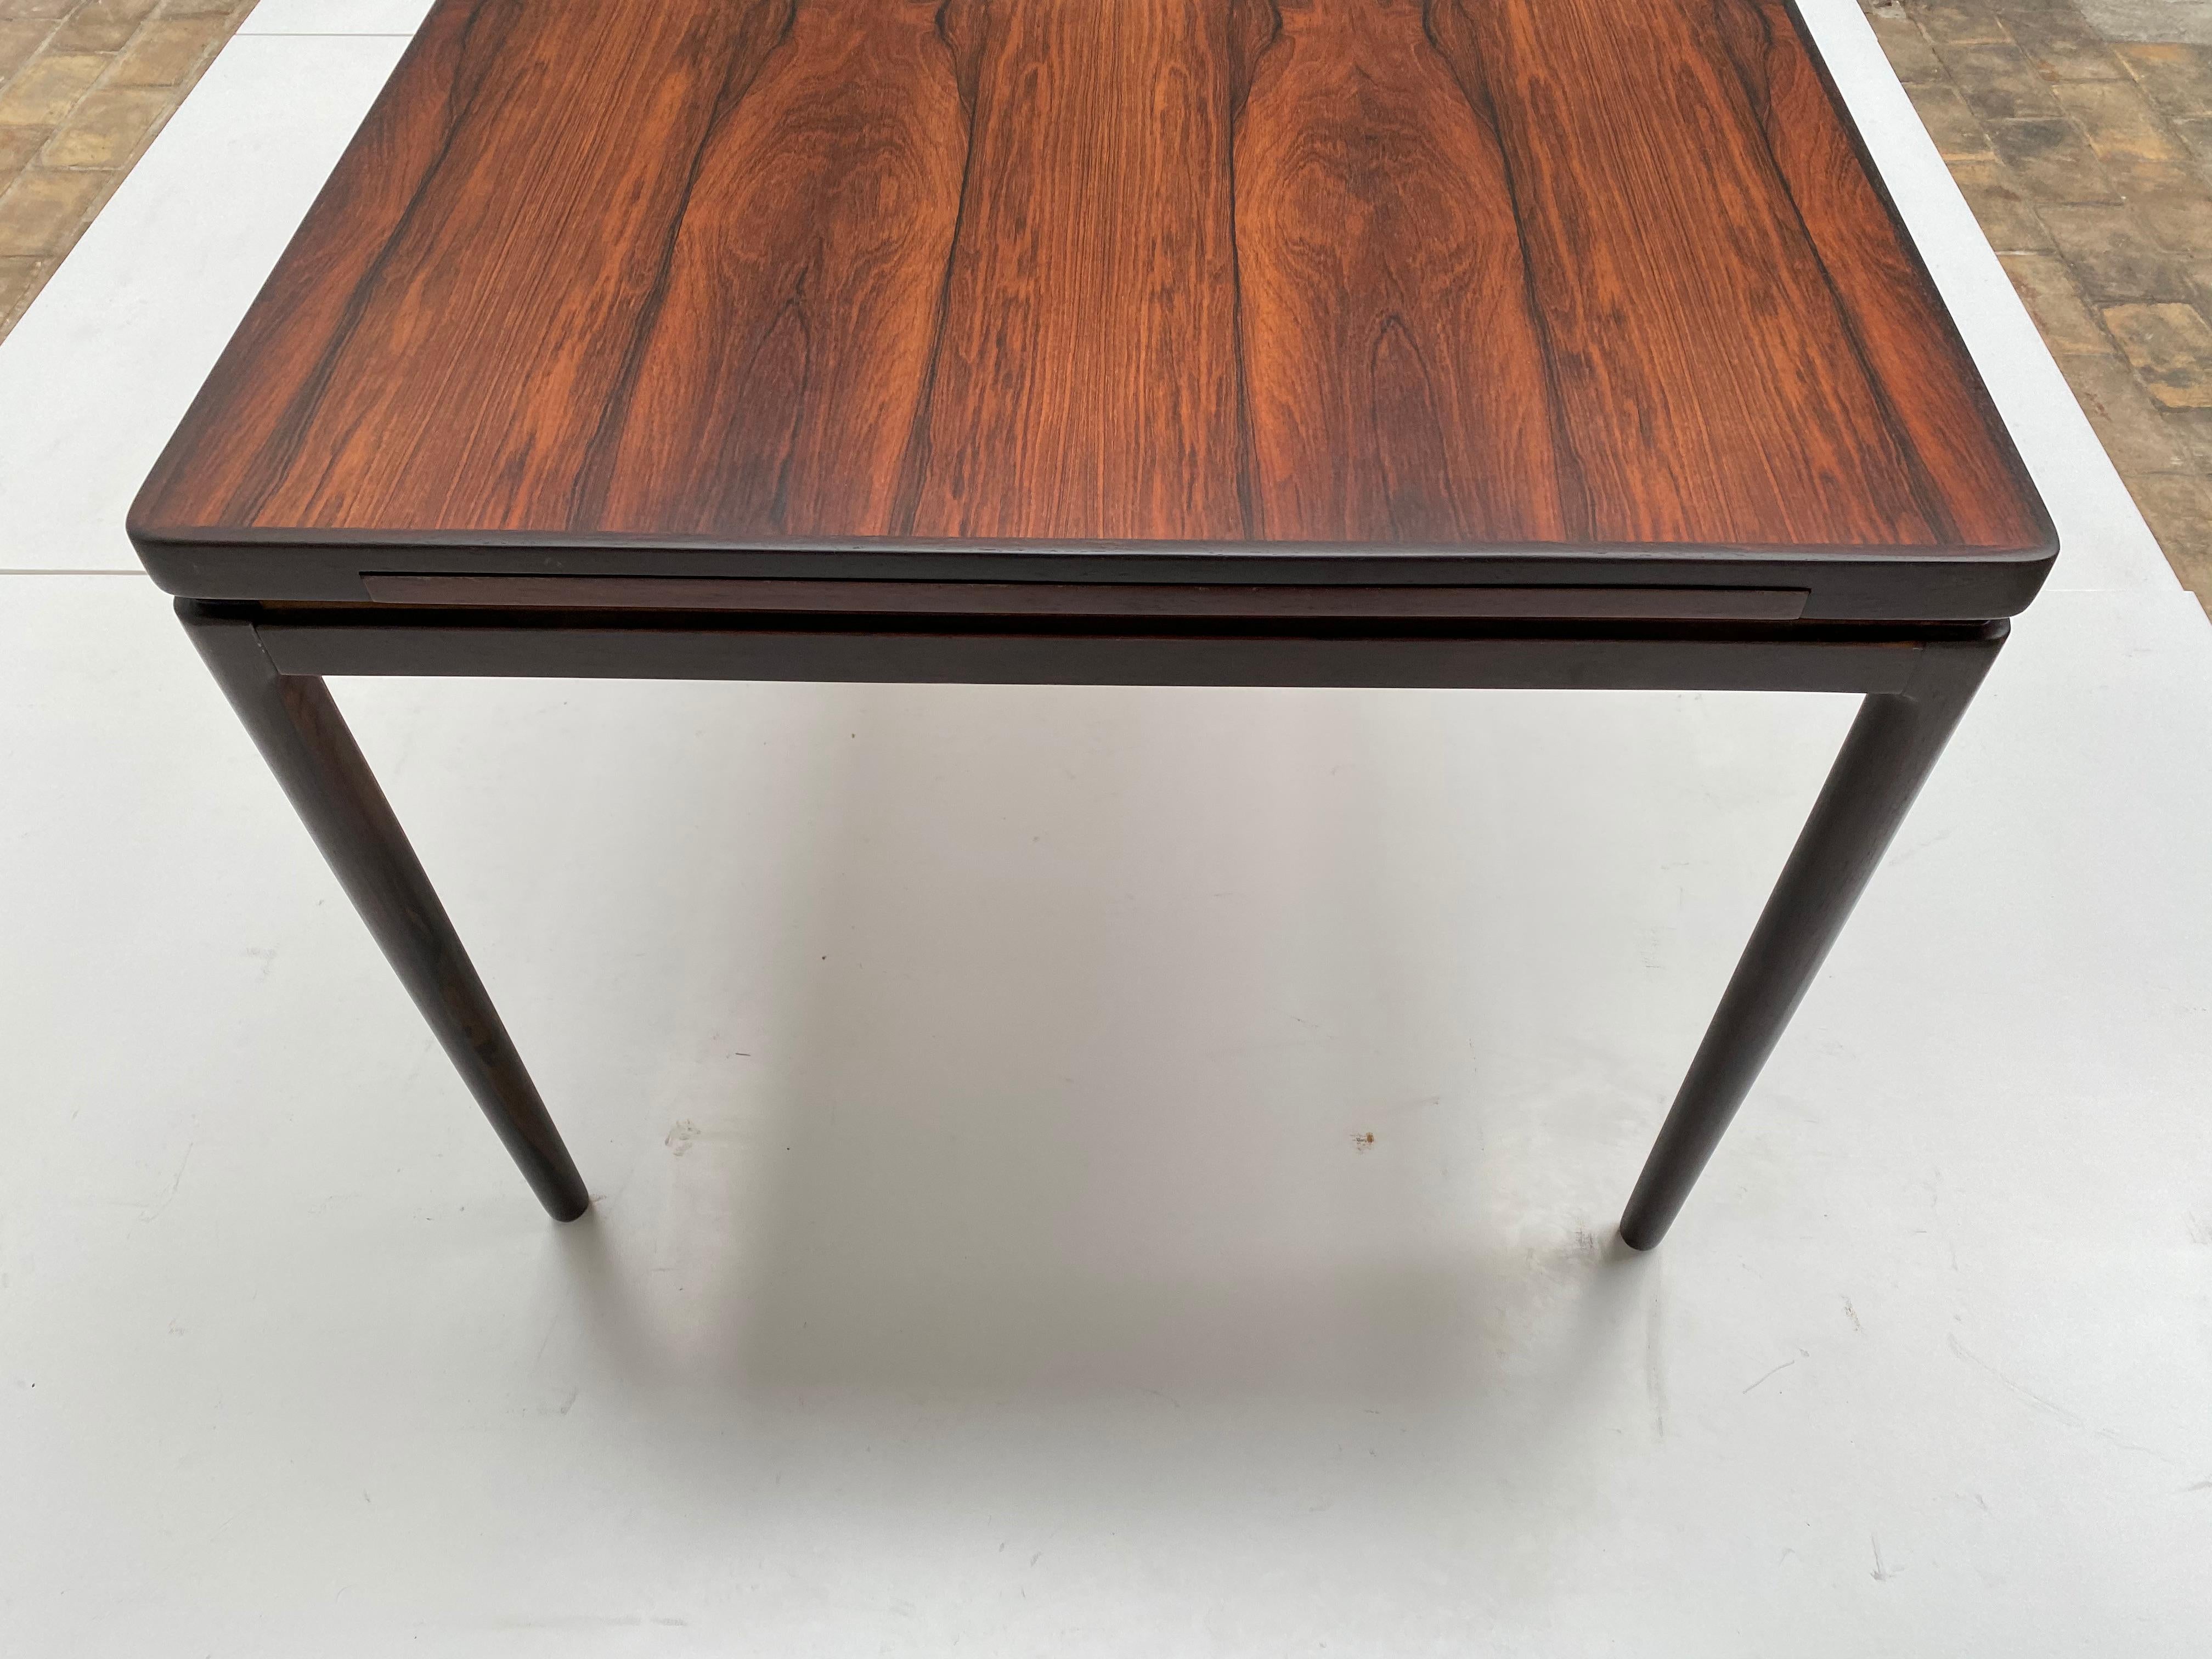 Please note that rosewood furniture can only be shipped within Europe and not to USA!

Beautiful large rosewood extendable dining table by Danish Designer Niels O. Moller for J.L. Moller Denmark

Perfect and fully refurbished